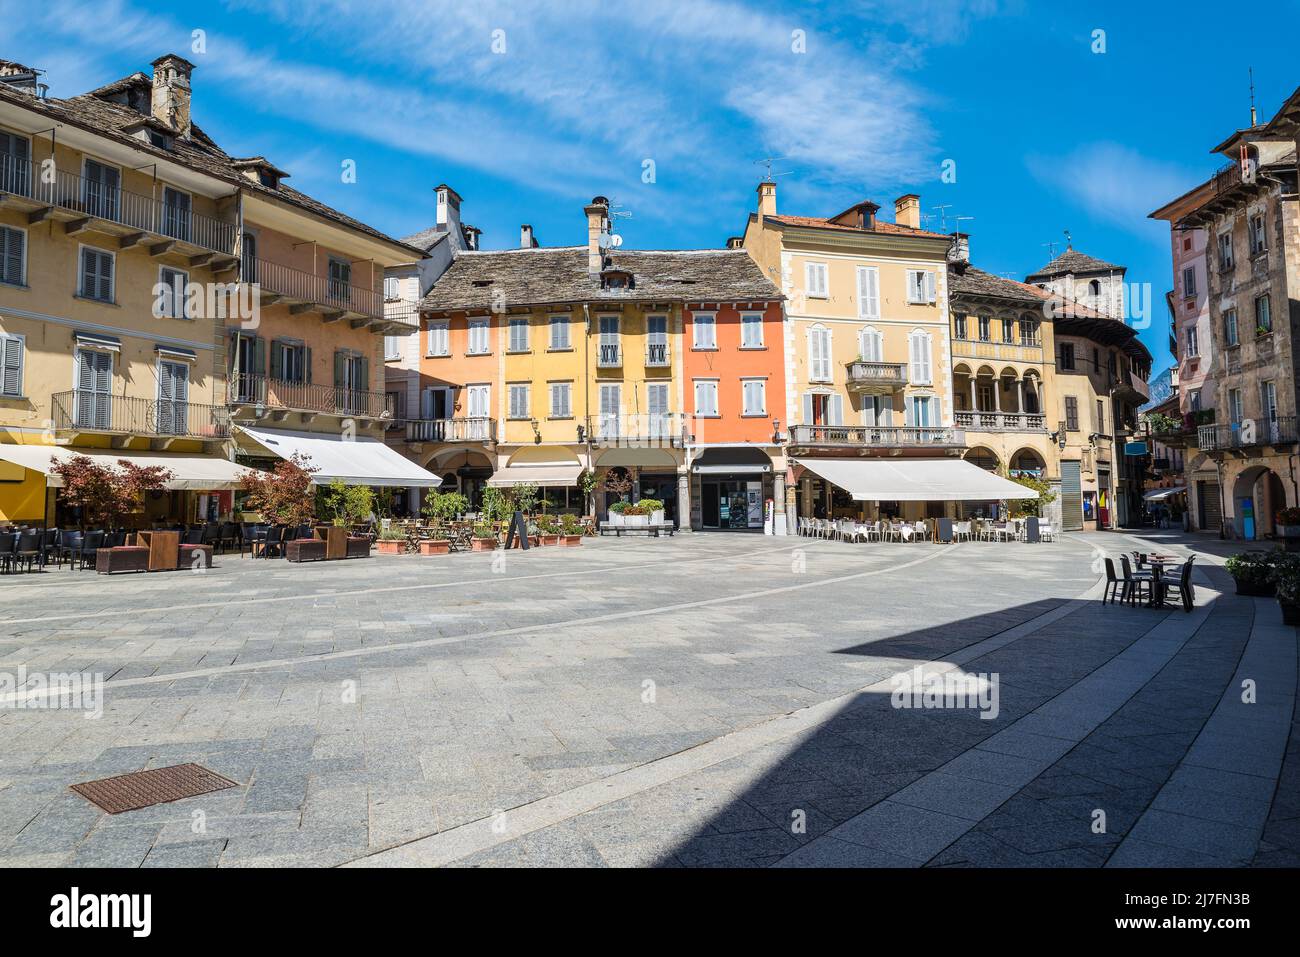 Ancient square in an old city in Europe. Domodossola, Italy Stock Photo